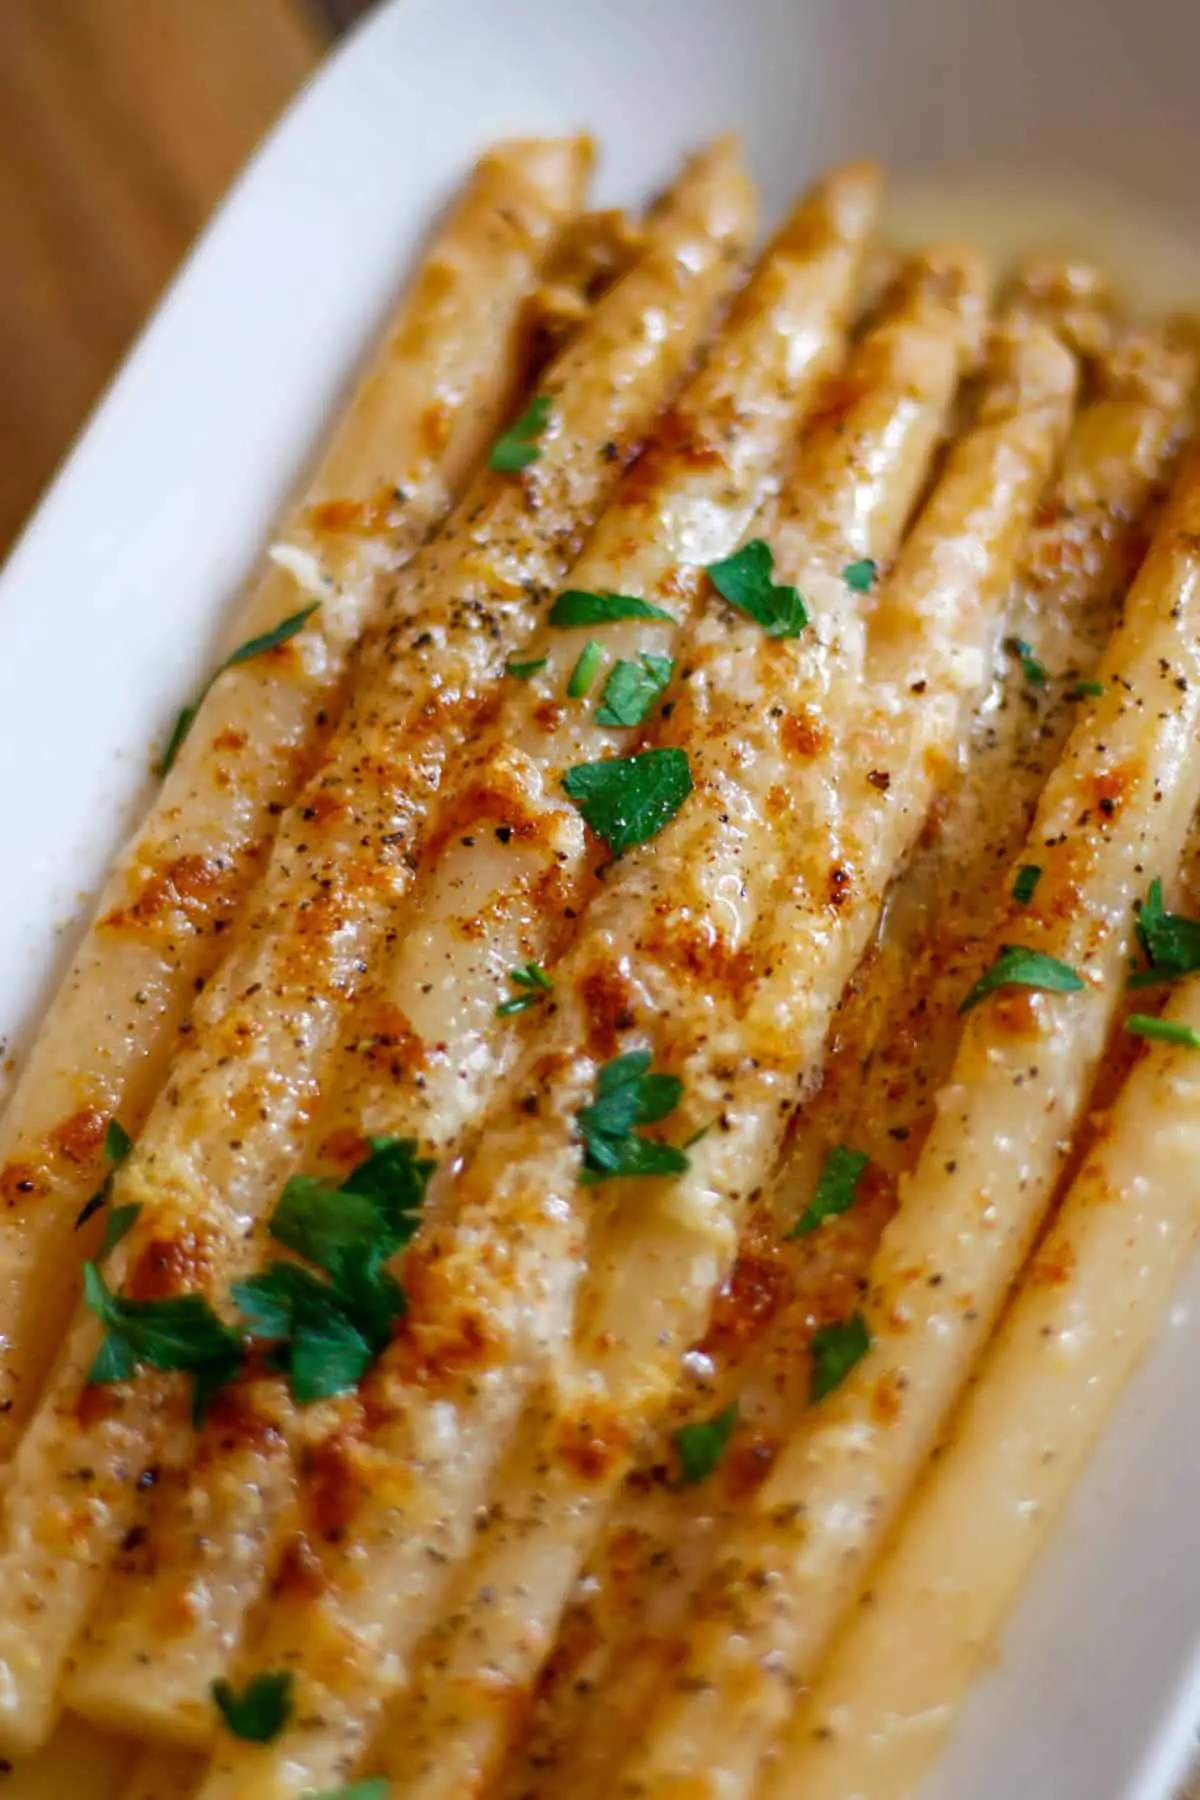 White asparagus with melted and browned cheese garnished with Italian parsley in a white dish.